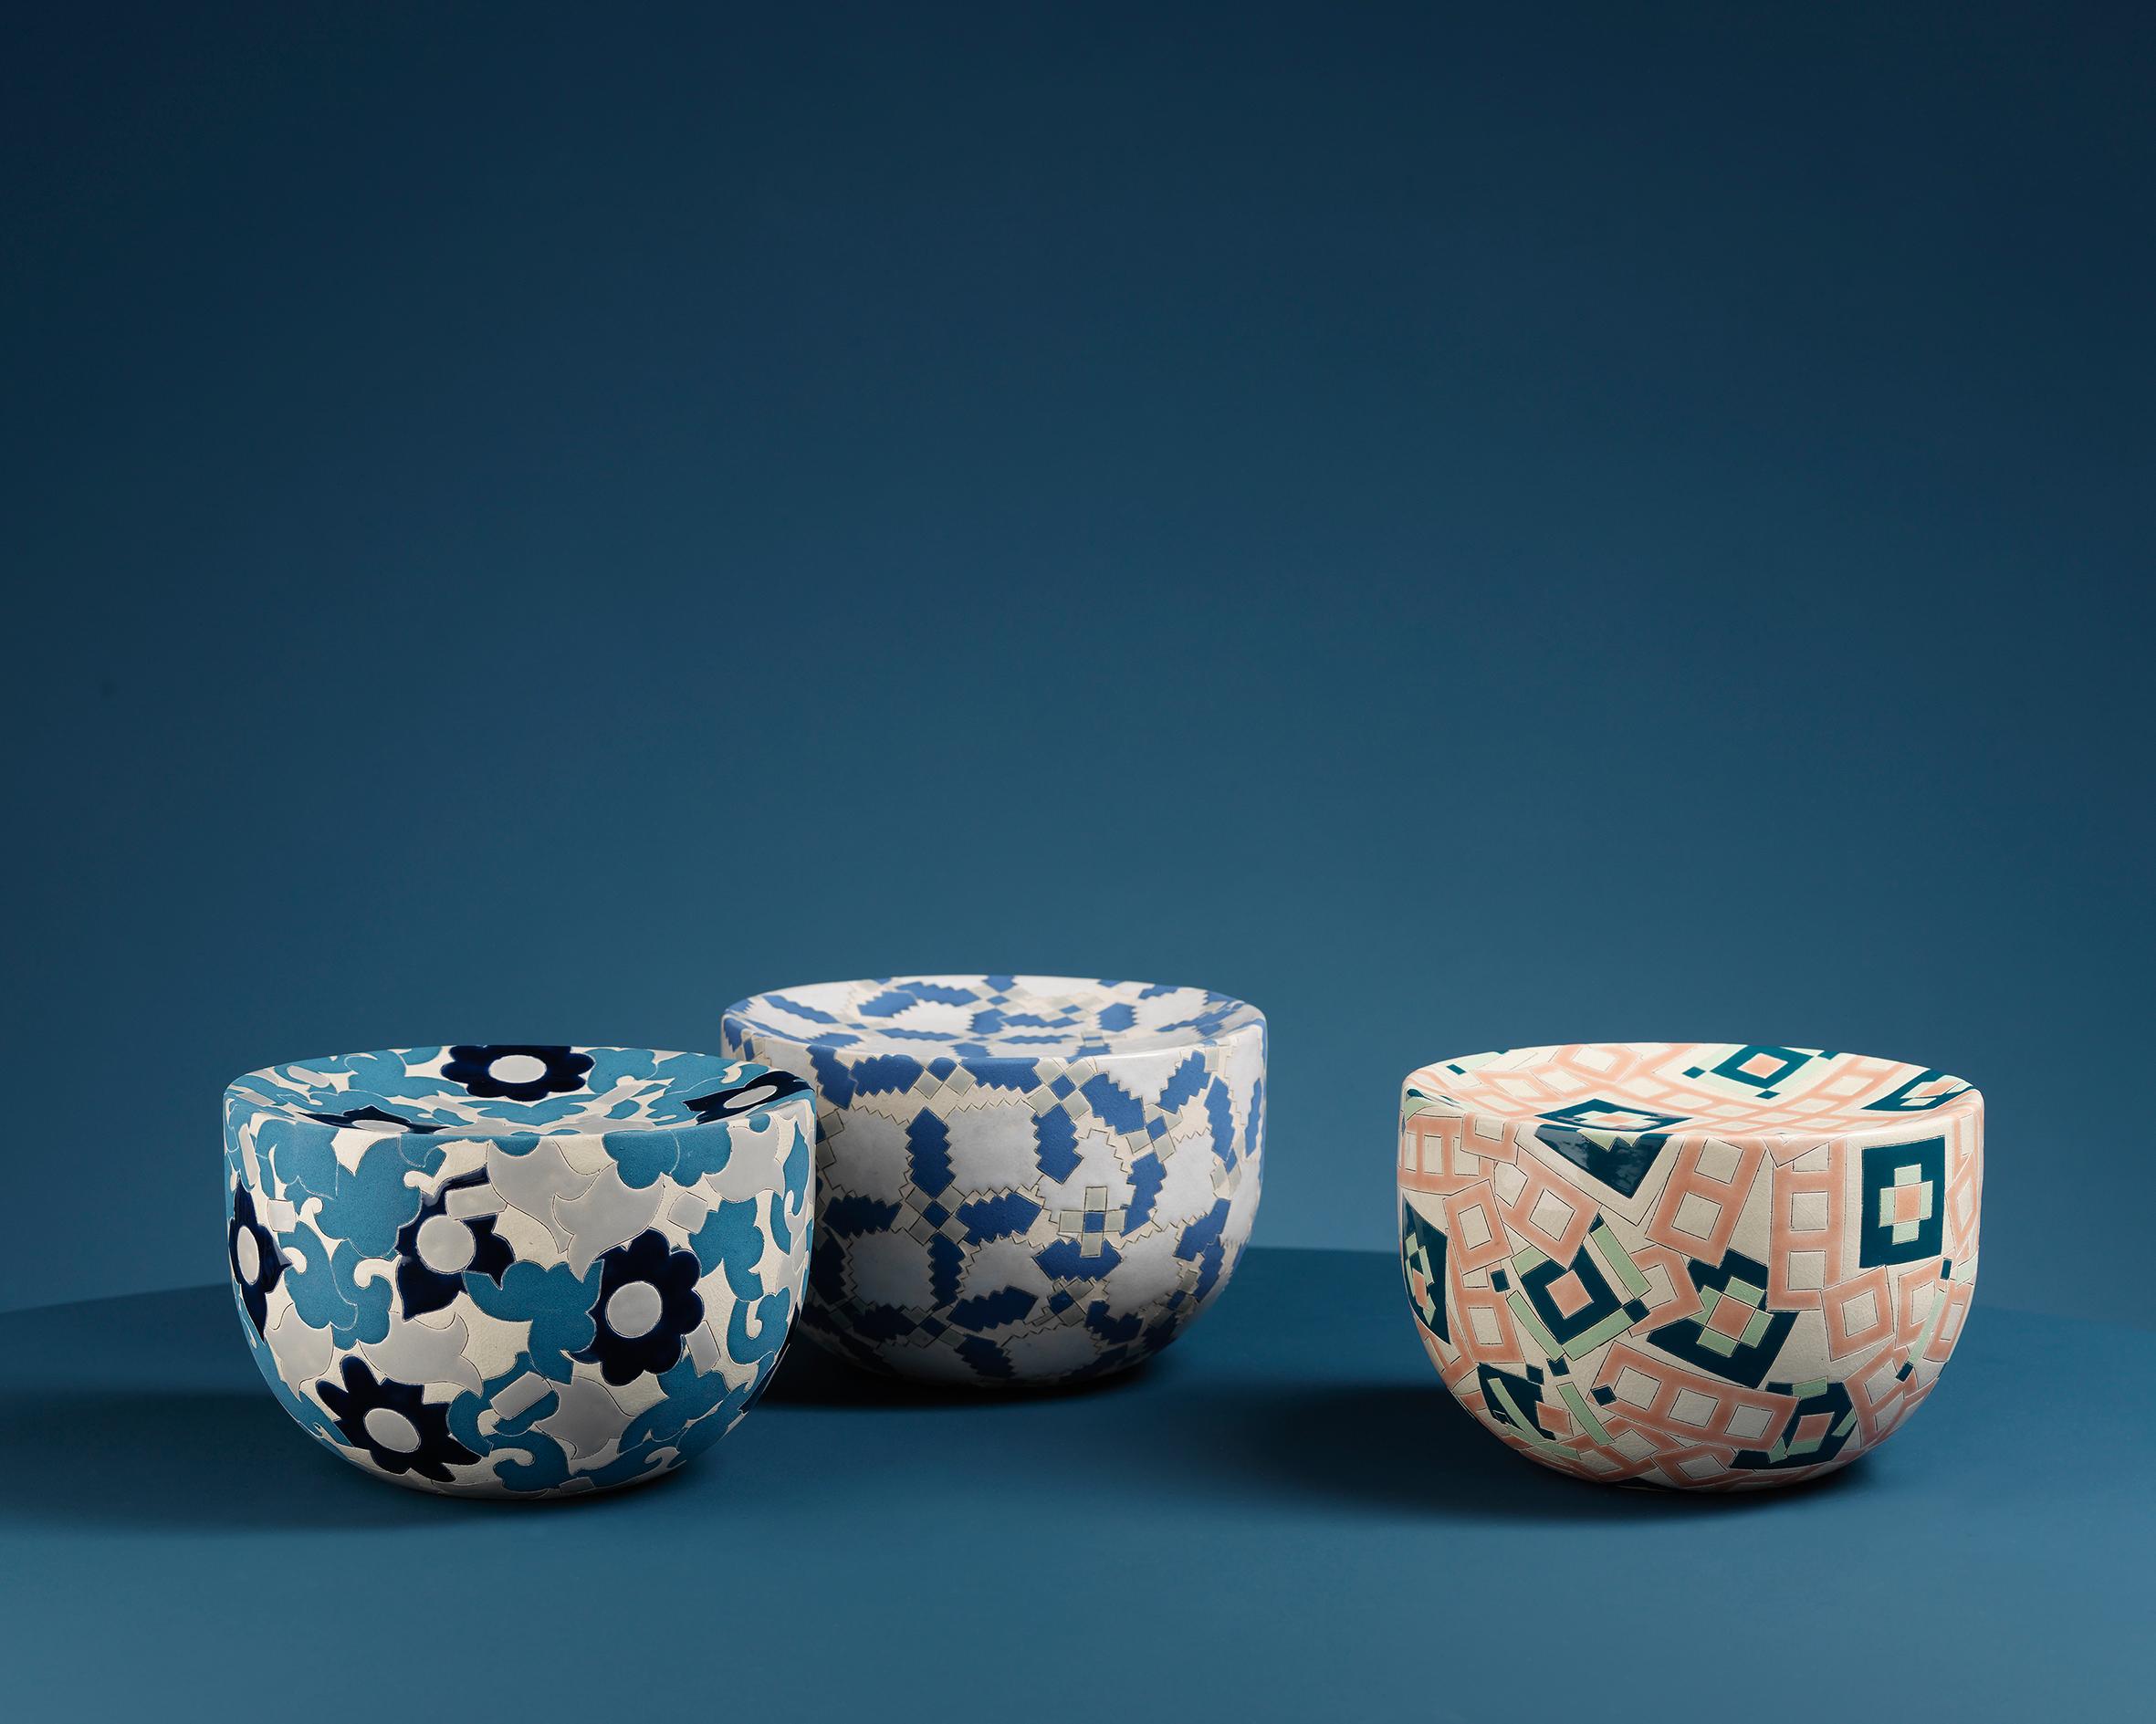 Ceramic form, inscribed line, earthenware glaze and vitreous slip

Based in Edinburgh, ceramic artist Frances Priest explores the cultural histories of ornament through the creation of intricately made ceramic objects and is represented in